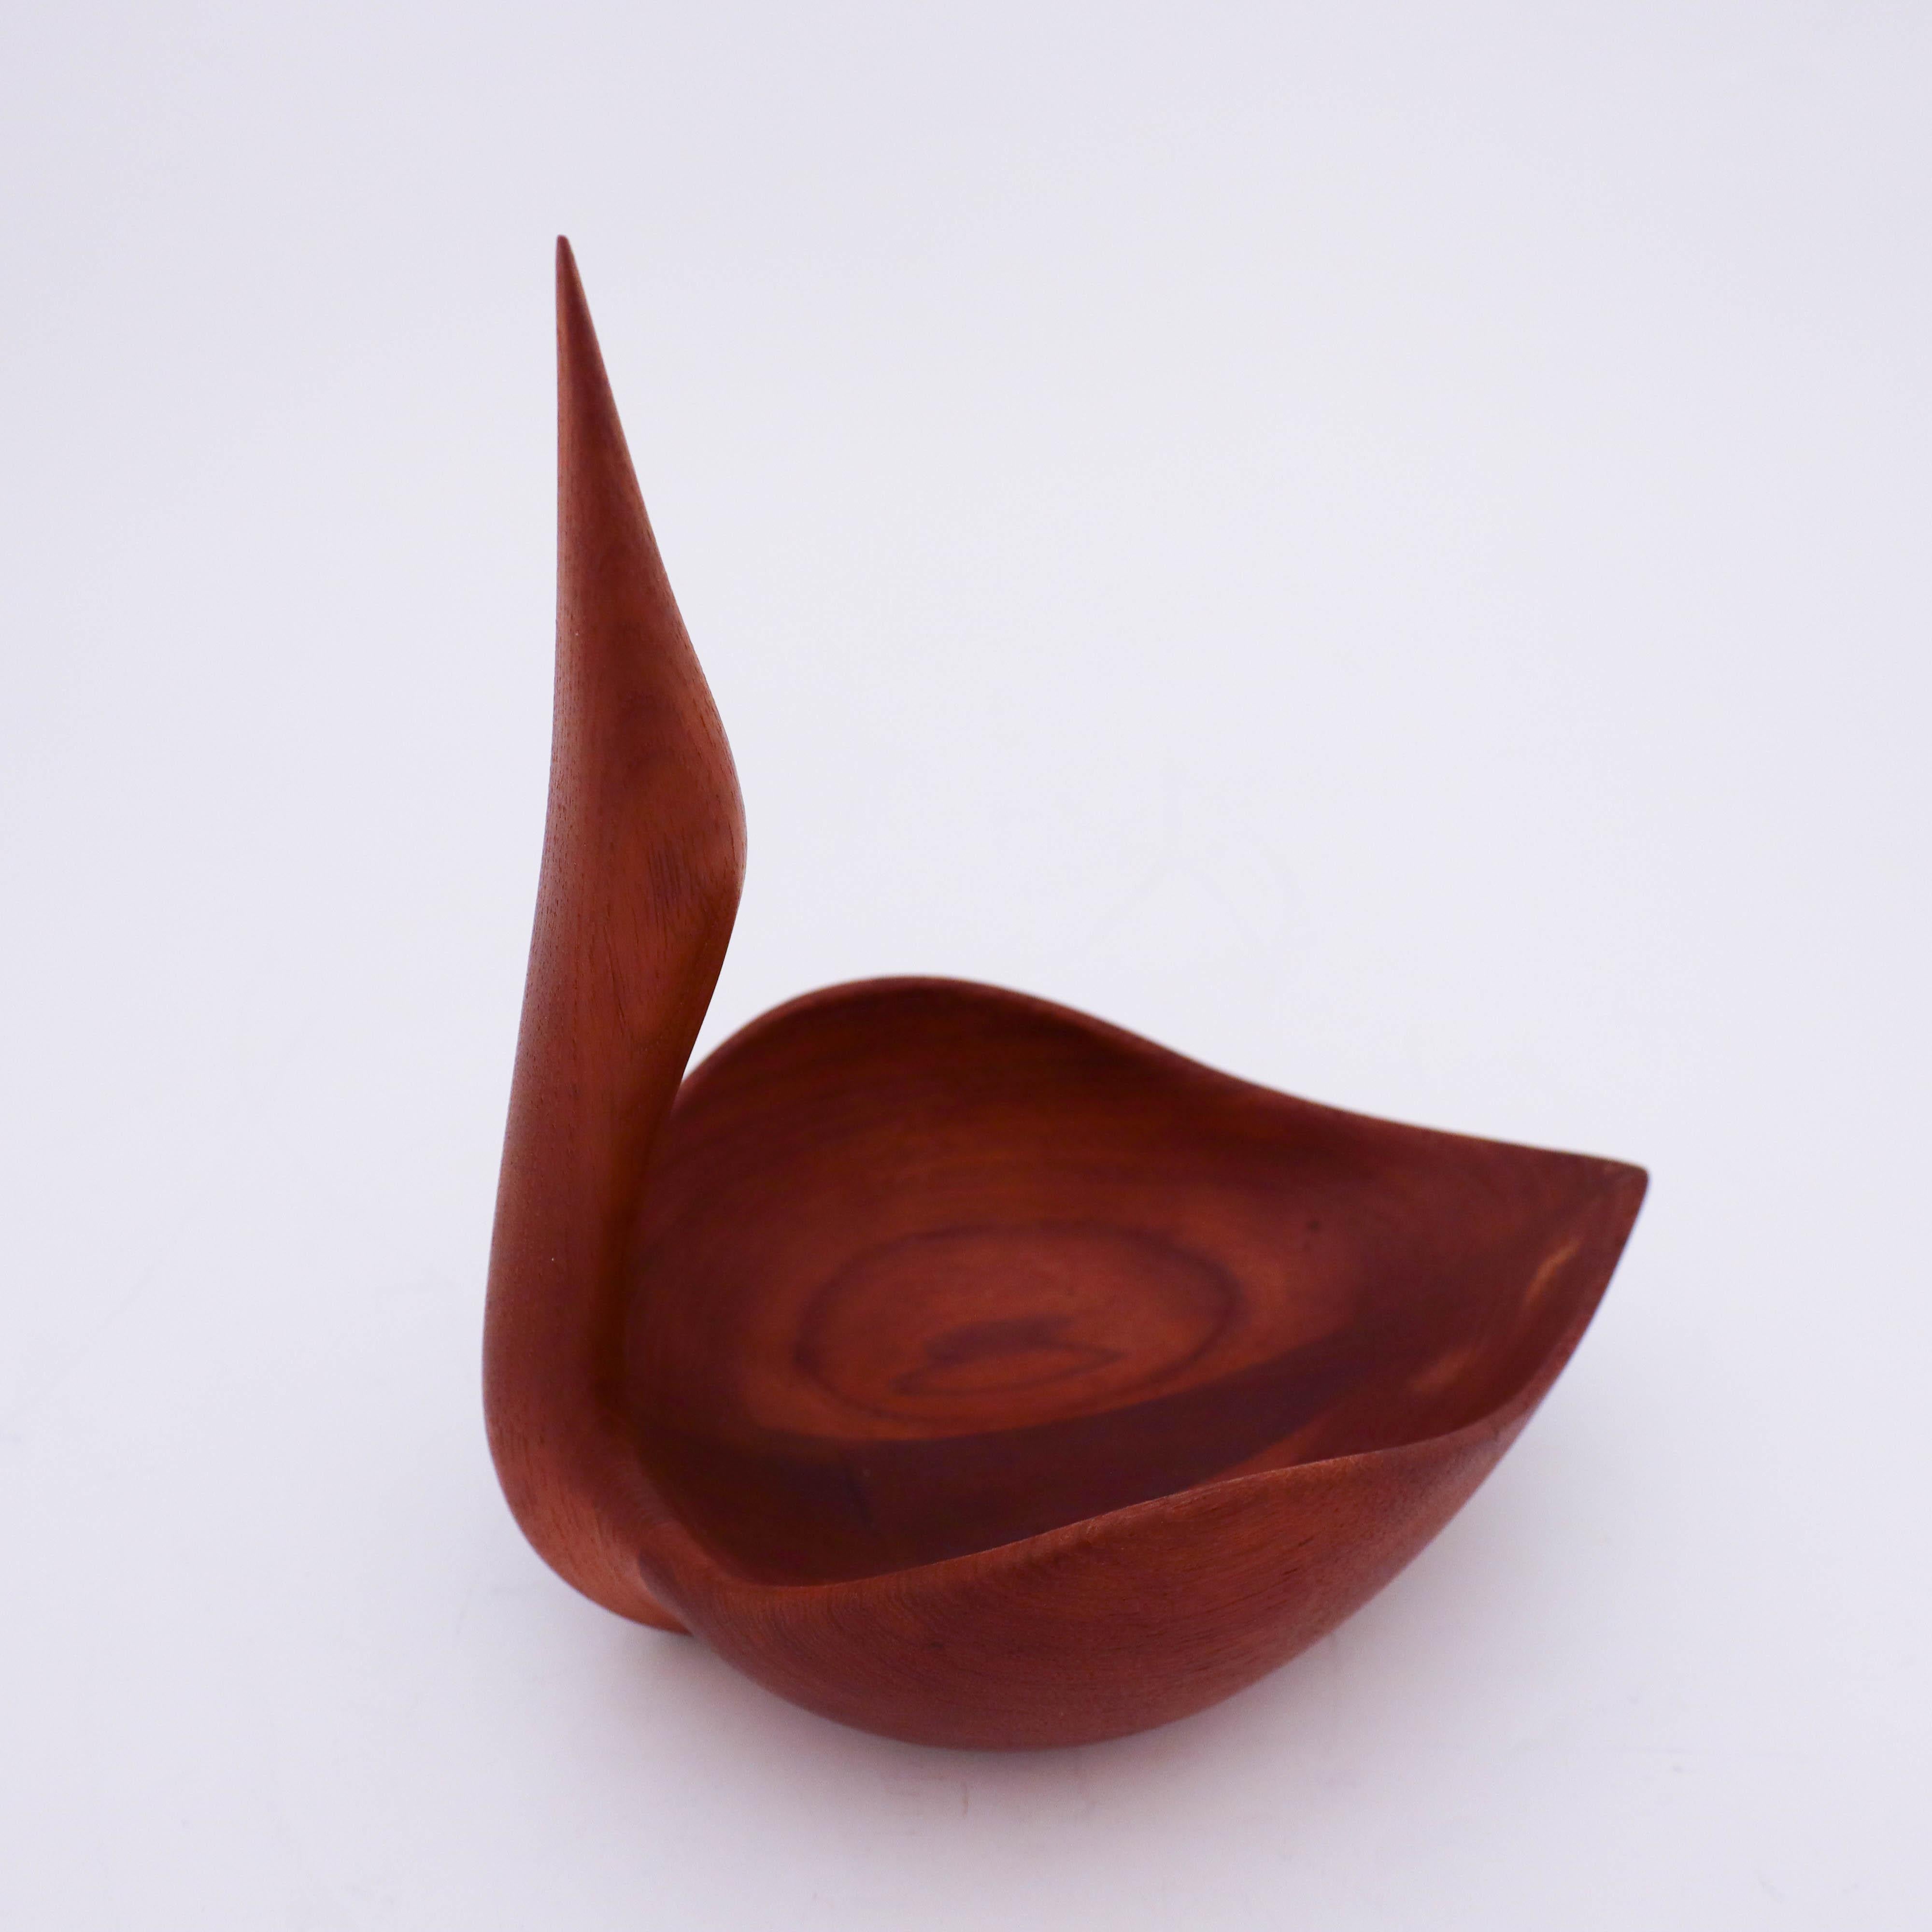 Sculpture / bowl in shape of a bird designed by Johnny Mattsson. Produced by Johnny Mattsson in Sweden.